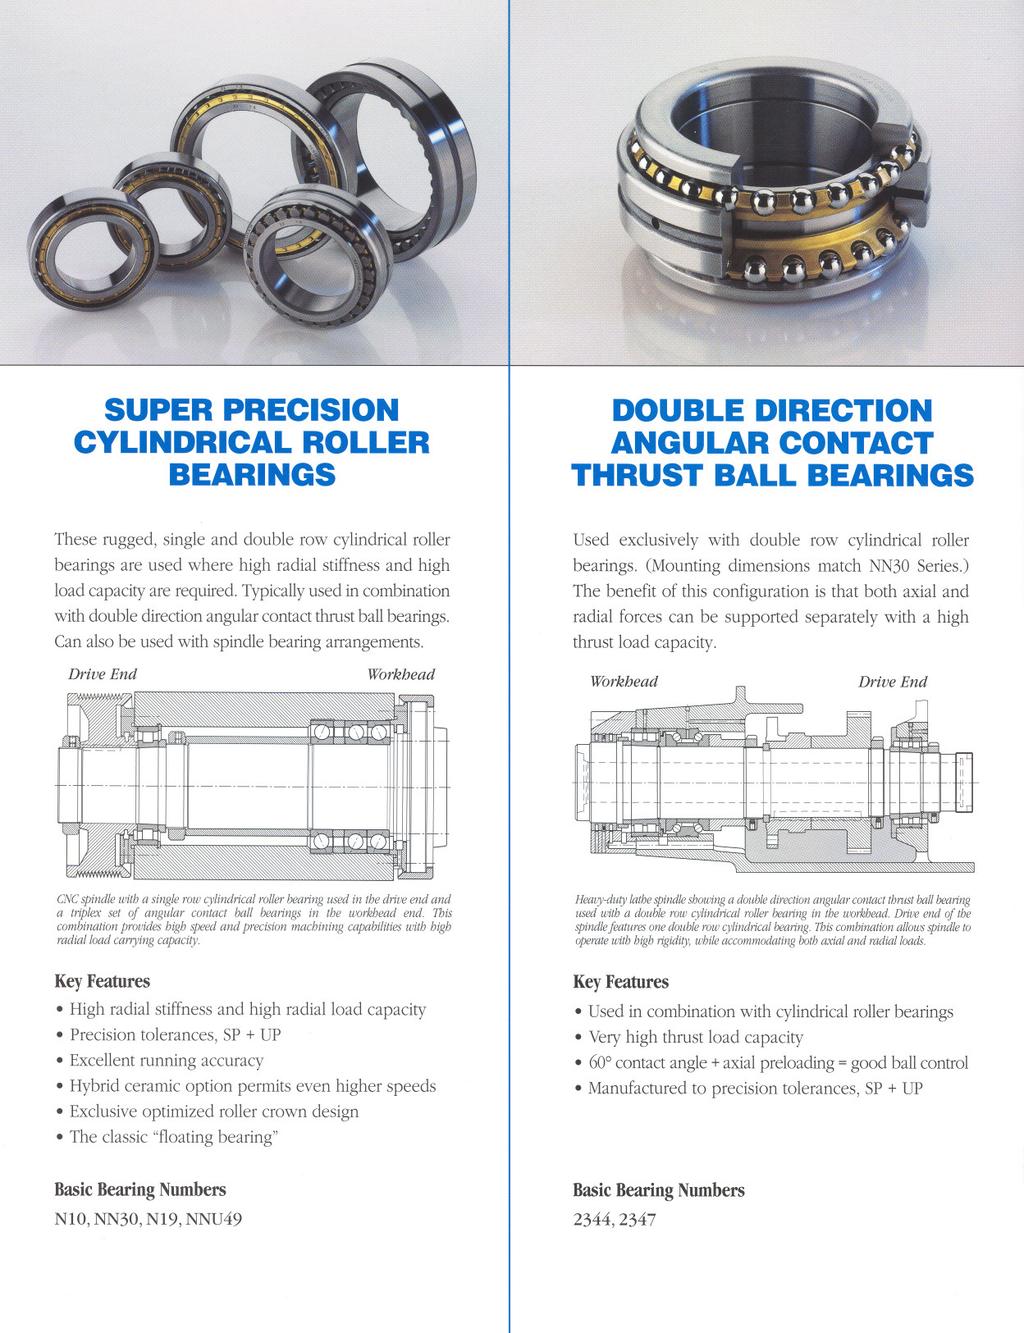 SUPER PRECISION CYLINDRICAL ROLLER BEARINGS DOUBLE DIRECTION ANGULAR CONTACT THRUST BALL BEARINGS These rugged, single and double row cylindrical roller bearings are used where high radial stiffness